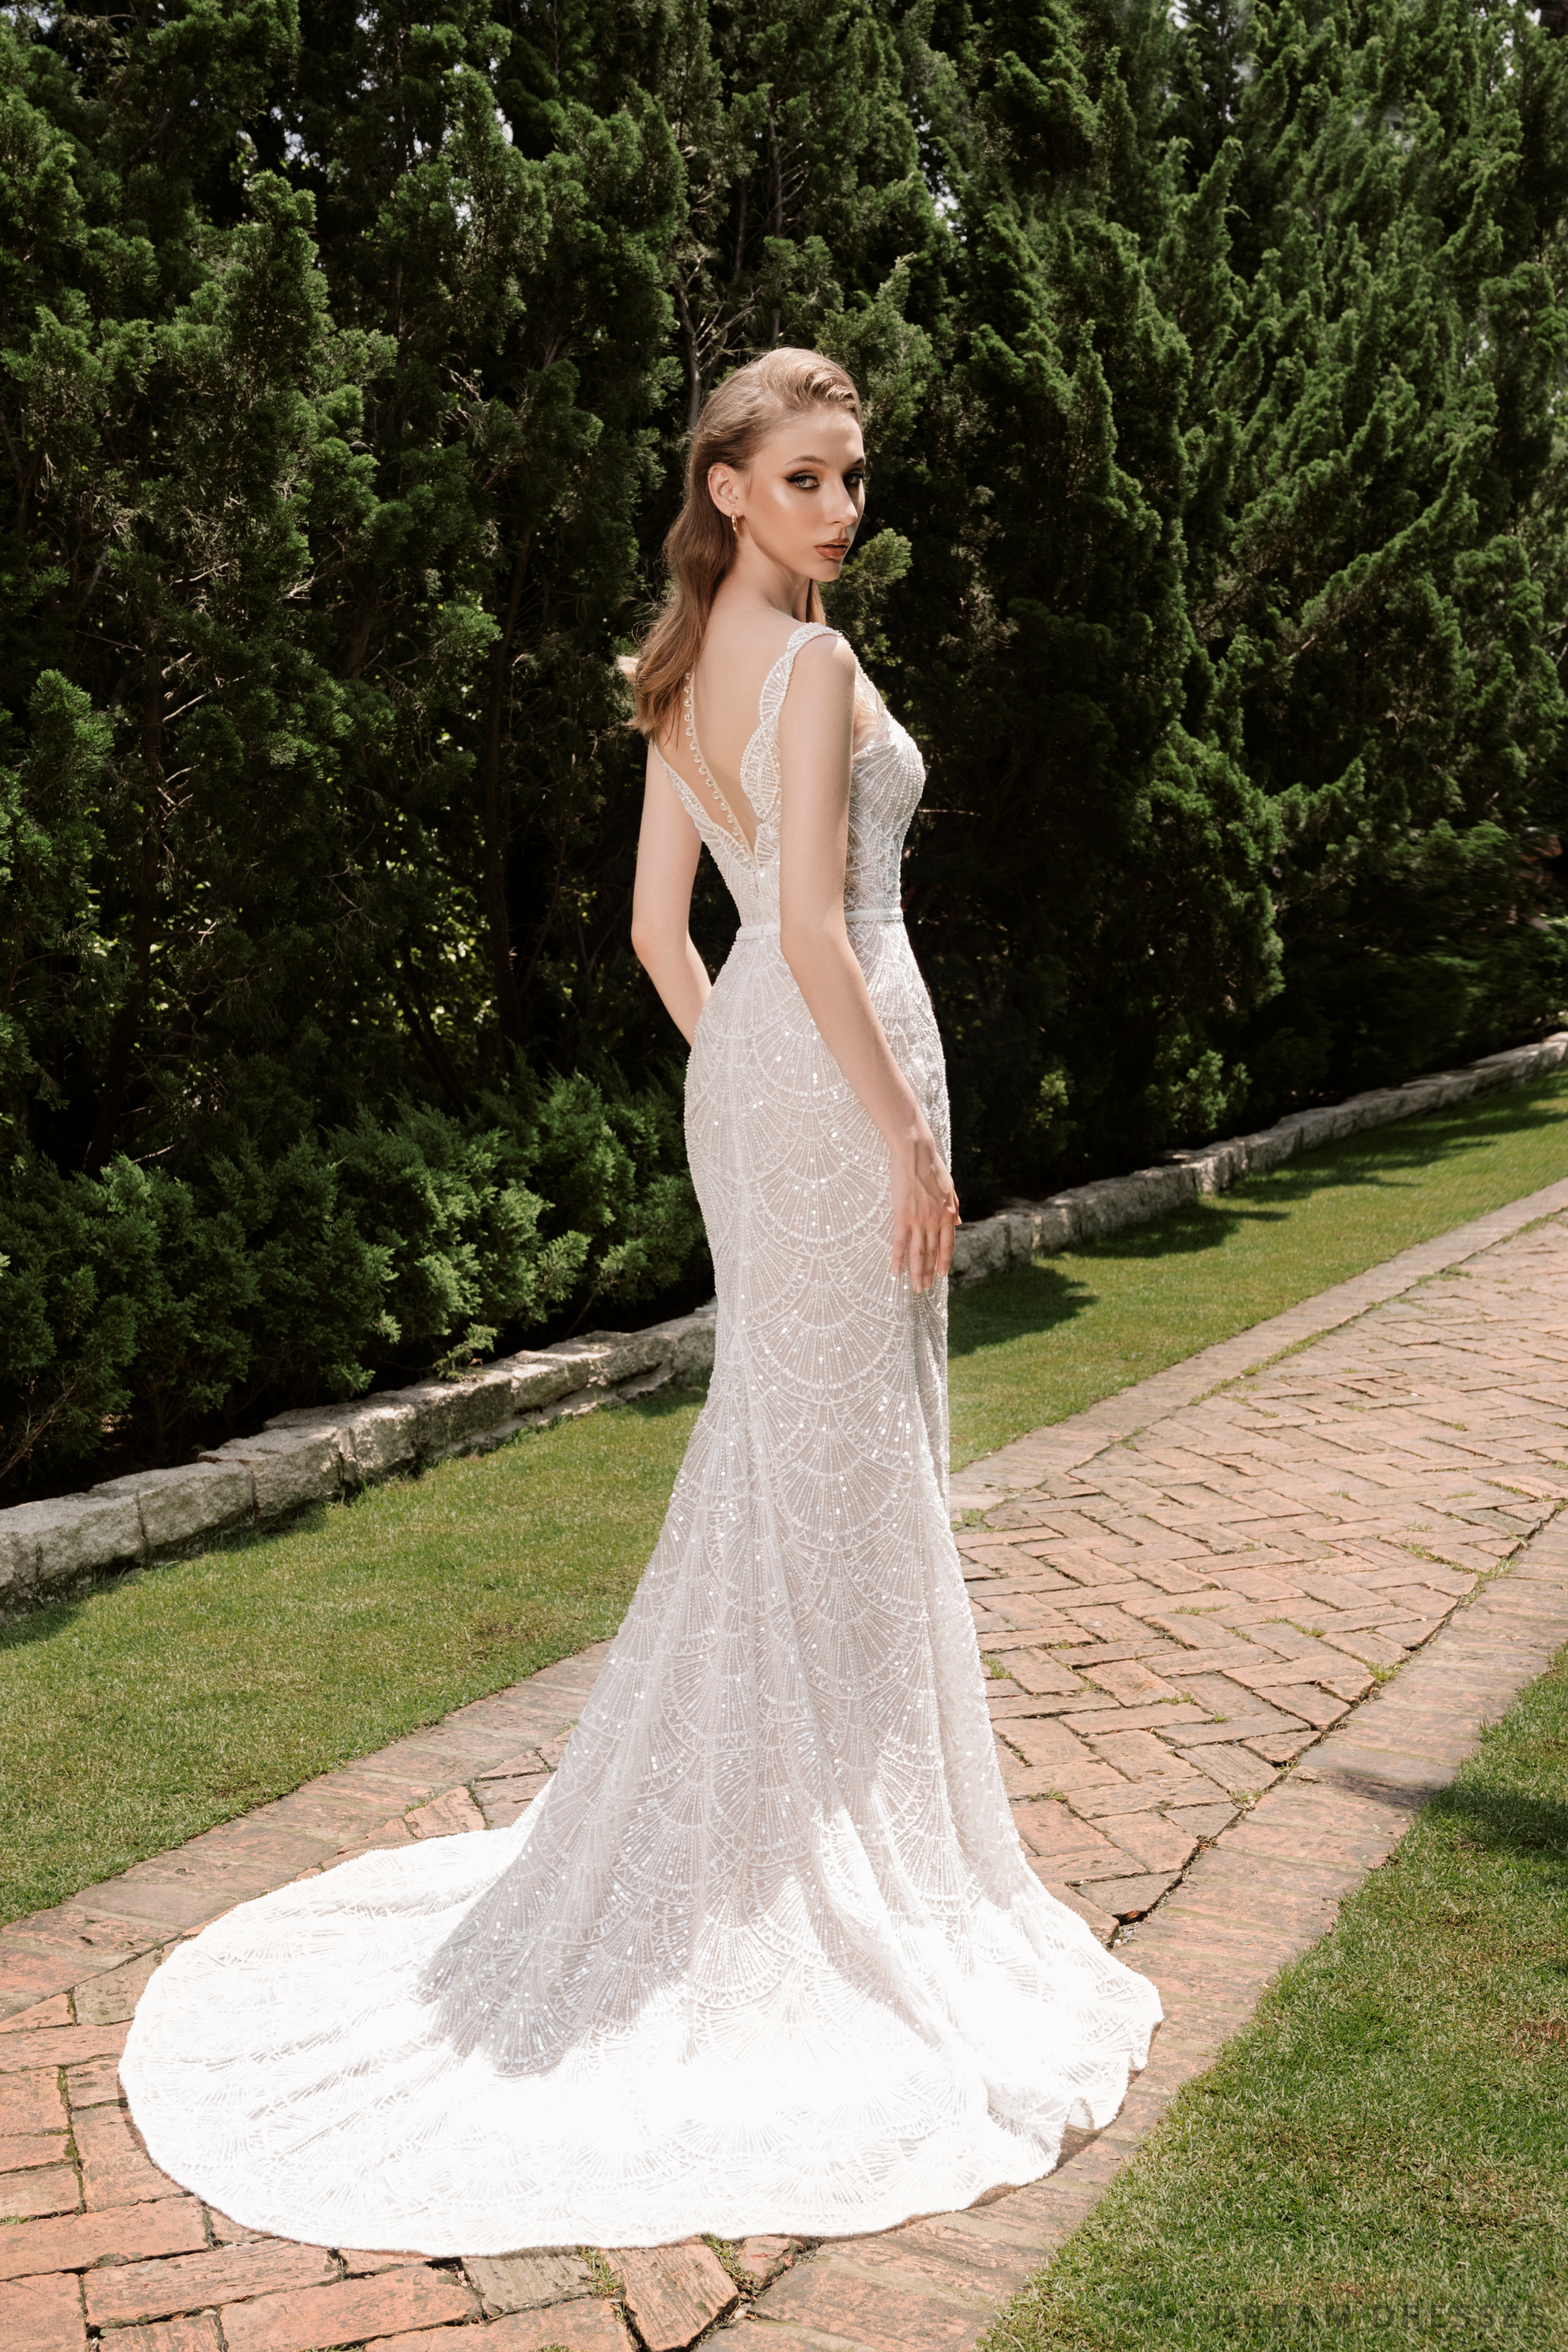 Mermaid Wedding Dress with Beaded Couture Lace (#ARABELLA)